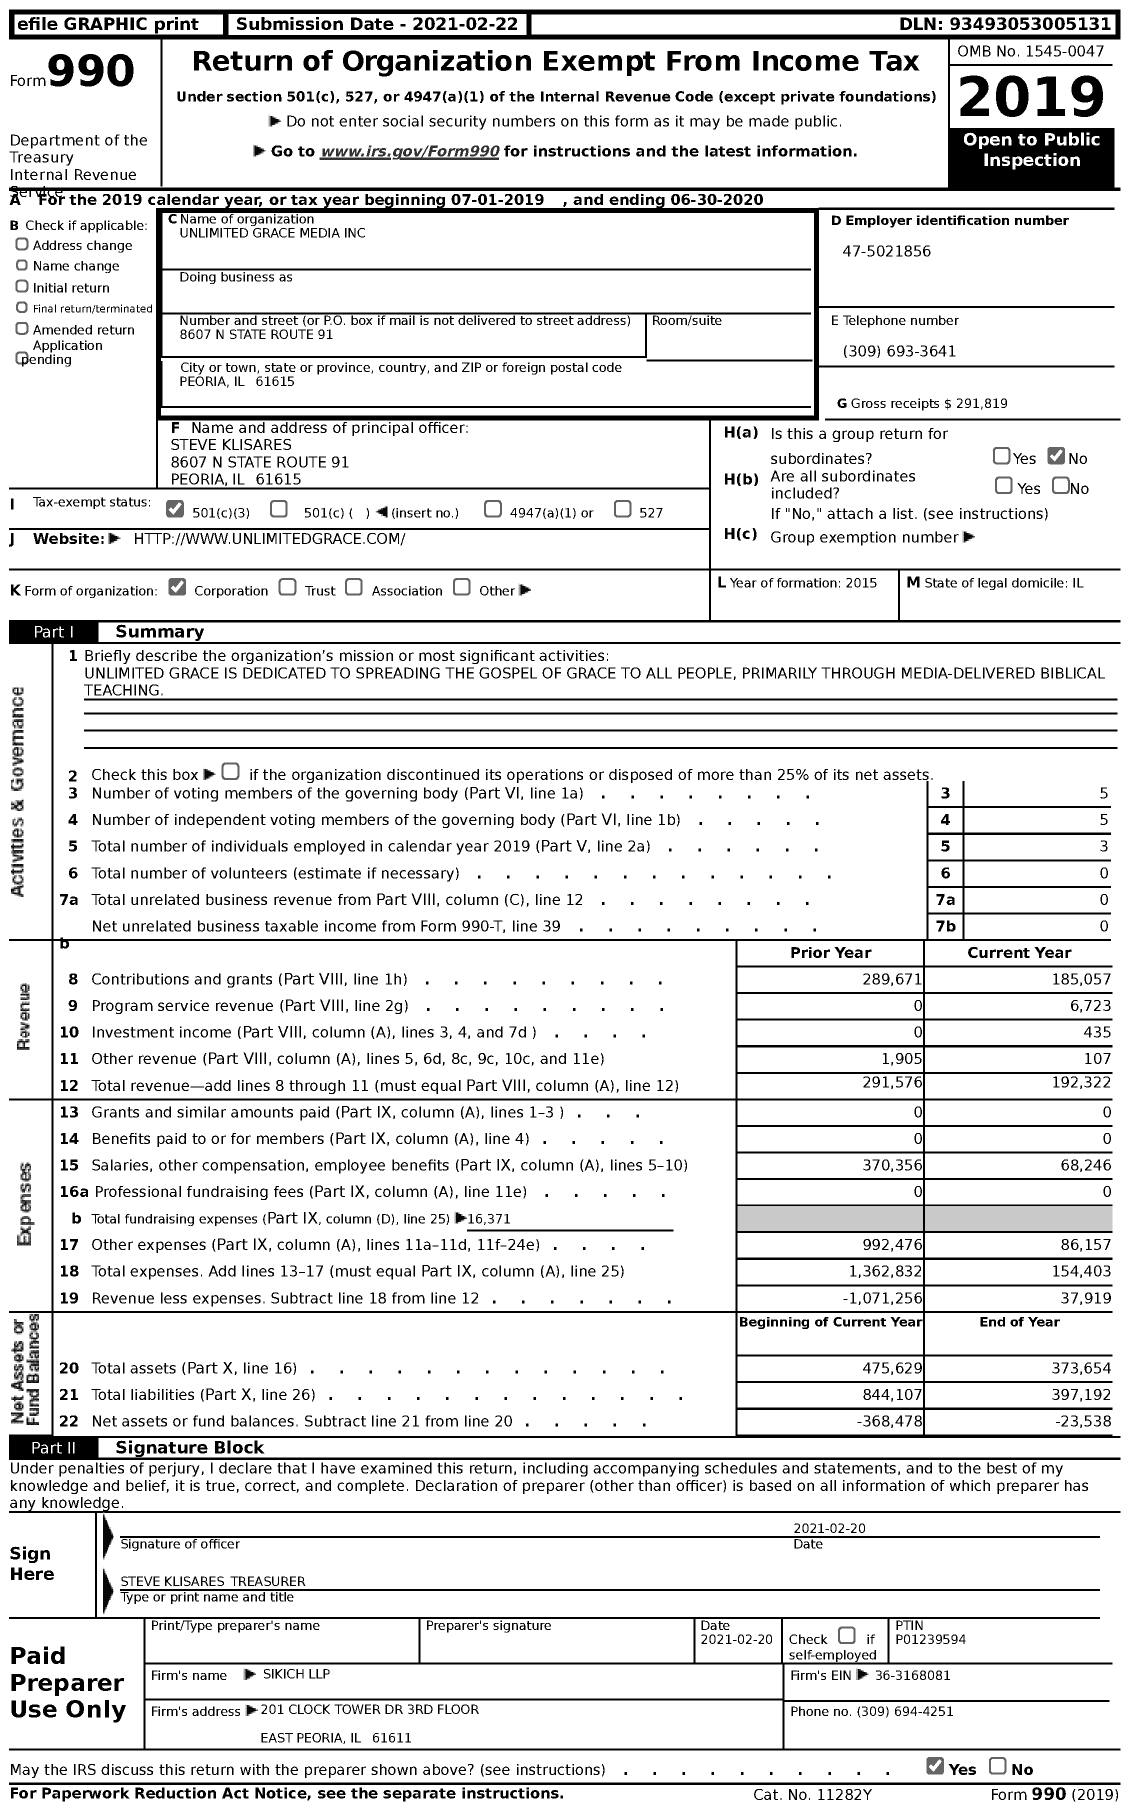 Image of first page of 2019 Form 990 for Unlimited Grace Media